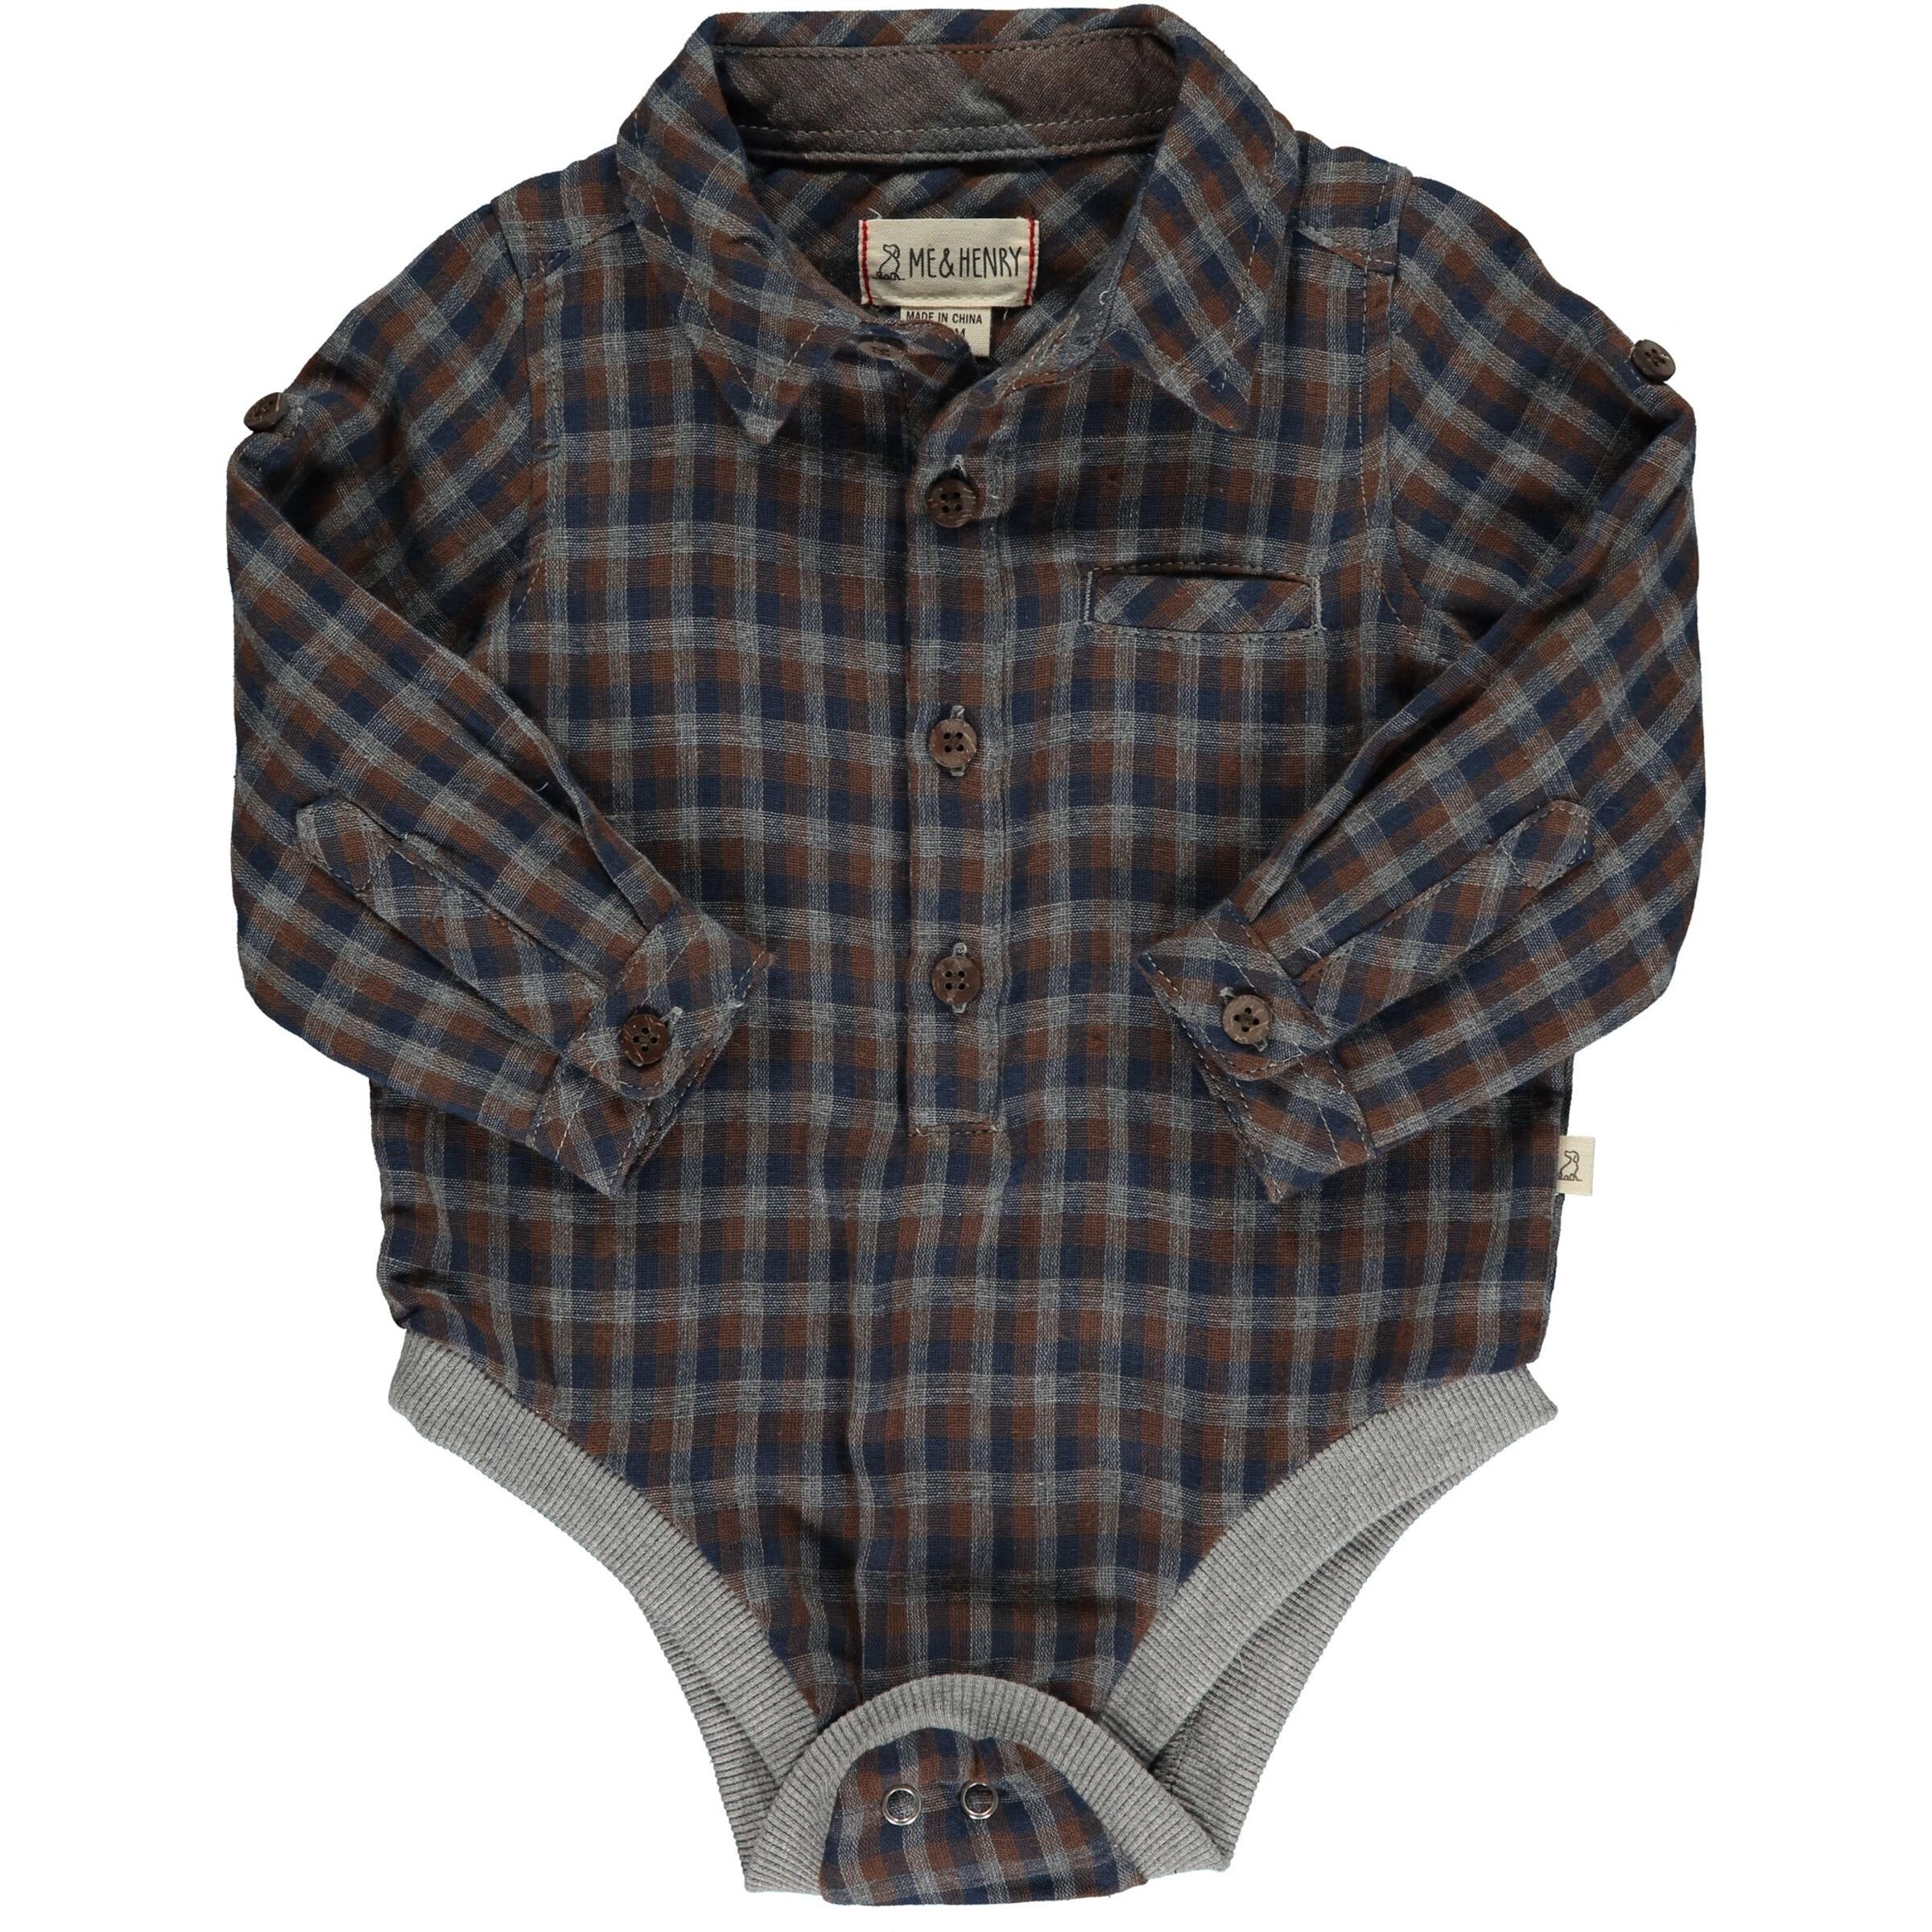 grey, blue and brown plaid collared onesie with snaps on the crotch